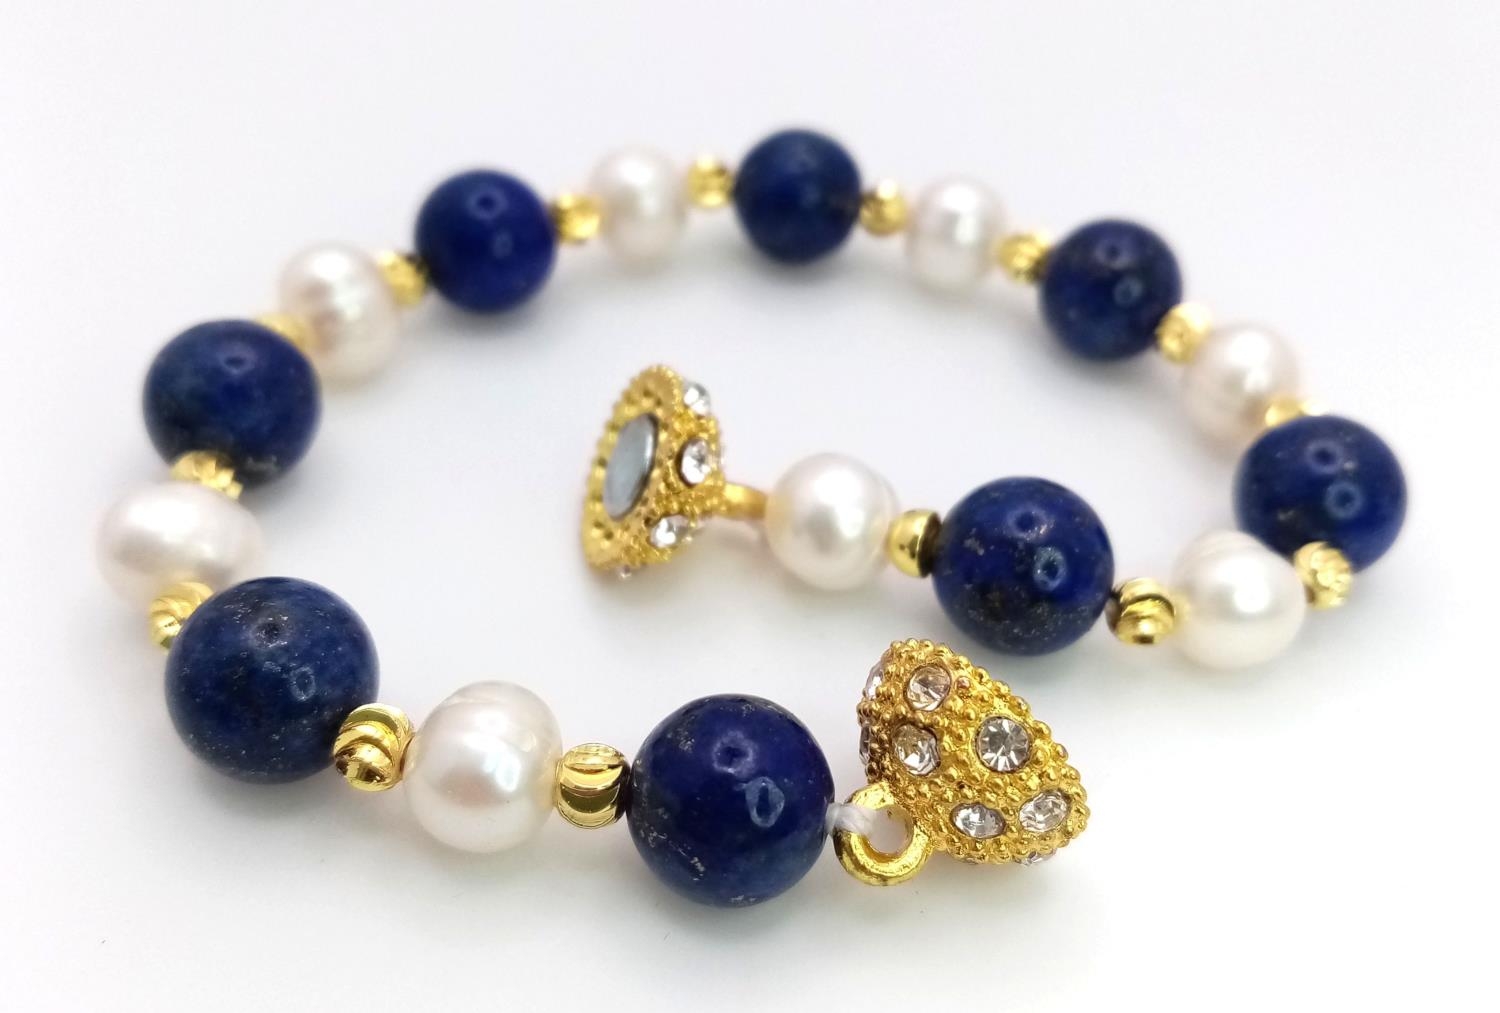 A Lapis Lazuli and Cultured Pearl Bracelet with Glitterball Clasp. 18cm - Image 2 of 4